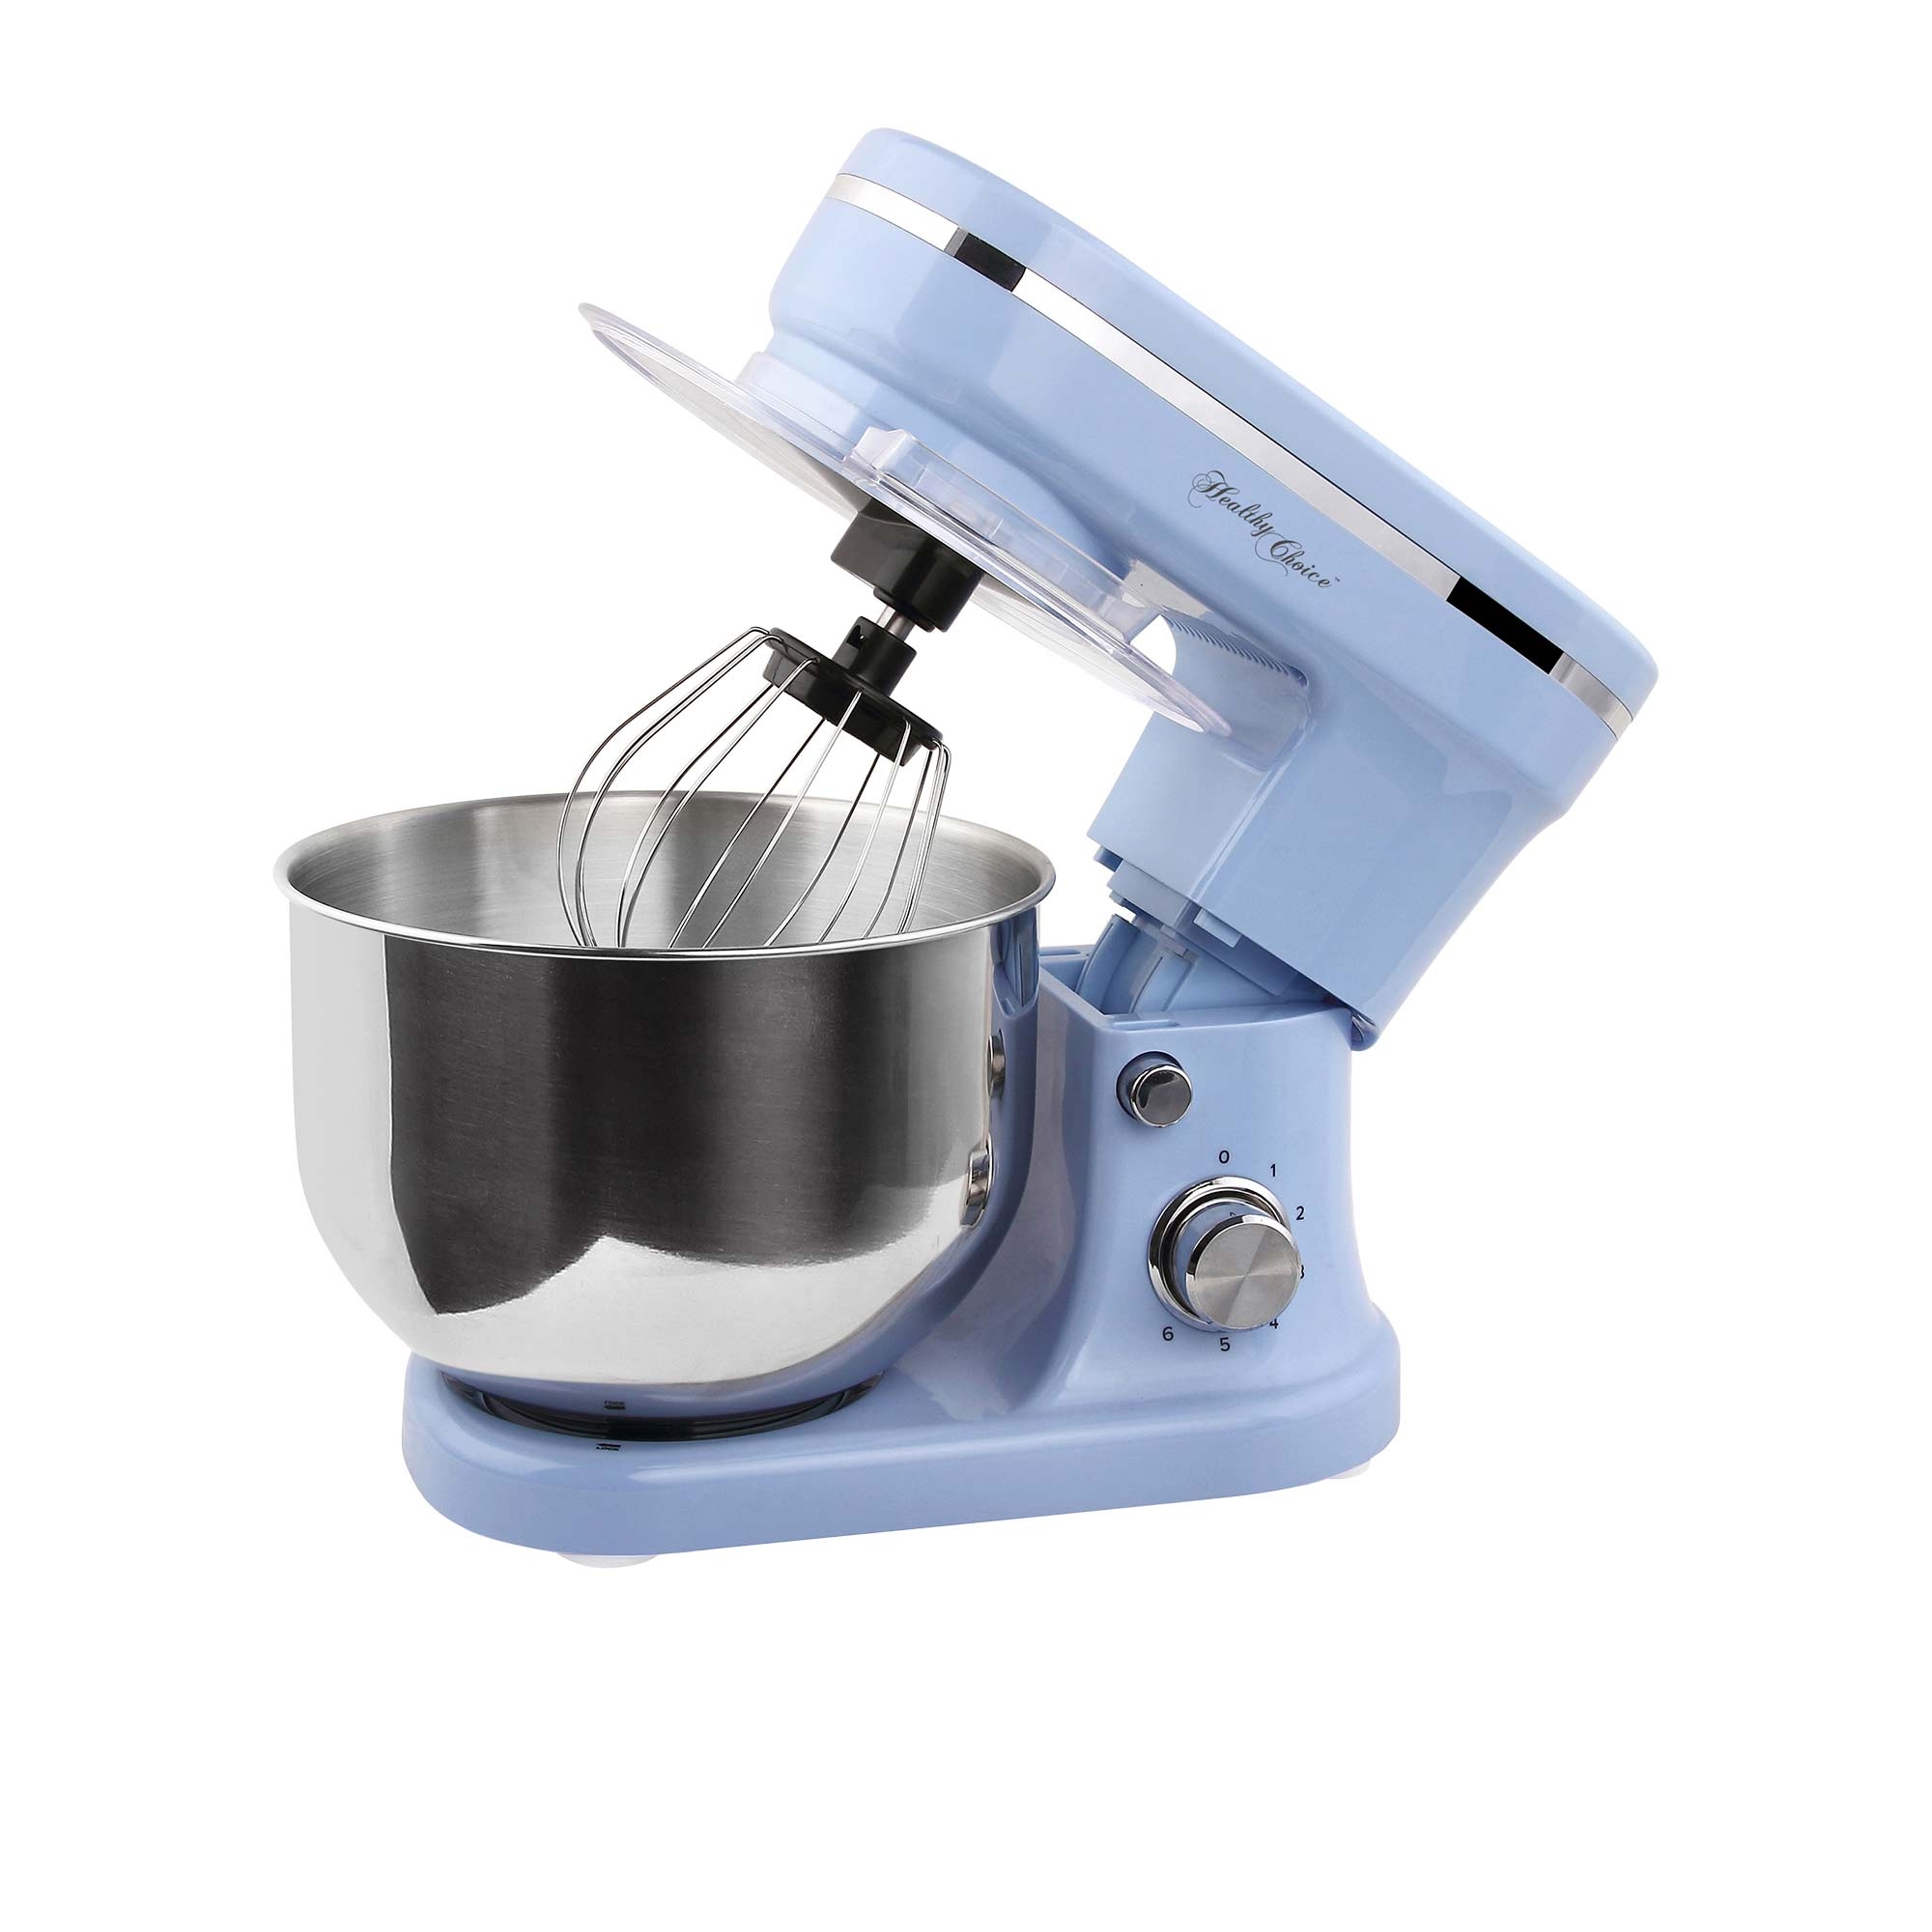 Healthy Choice Mix Master Stand Mixer Blue Image 2